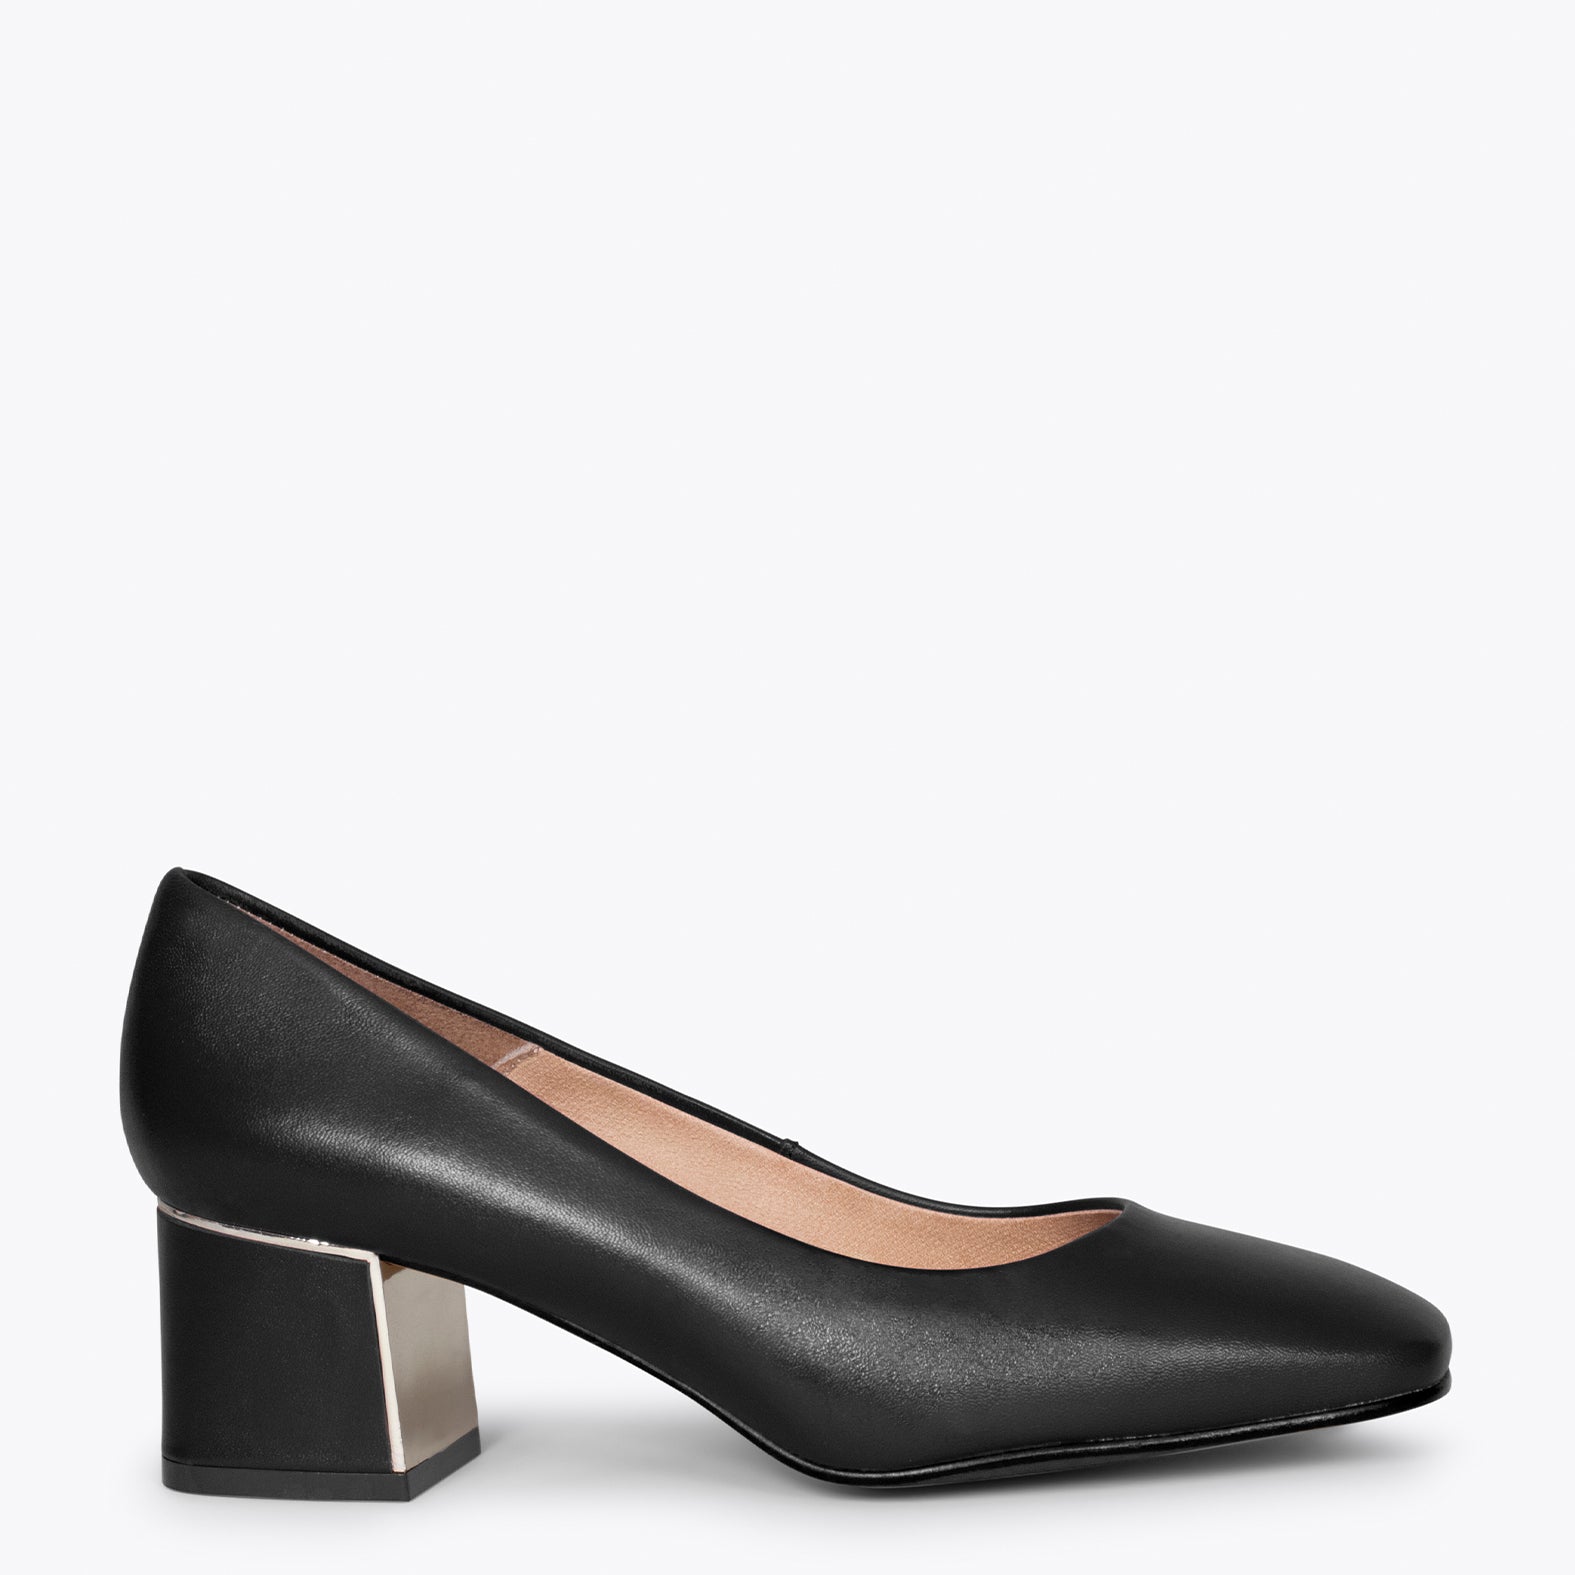 FEMME – BLACK mid heel shoes with square toe